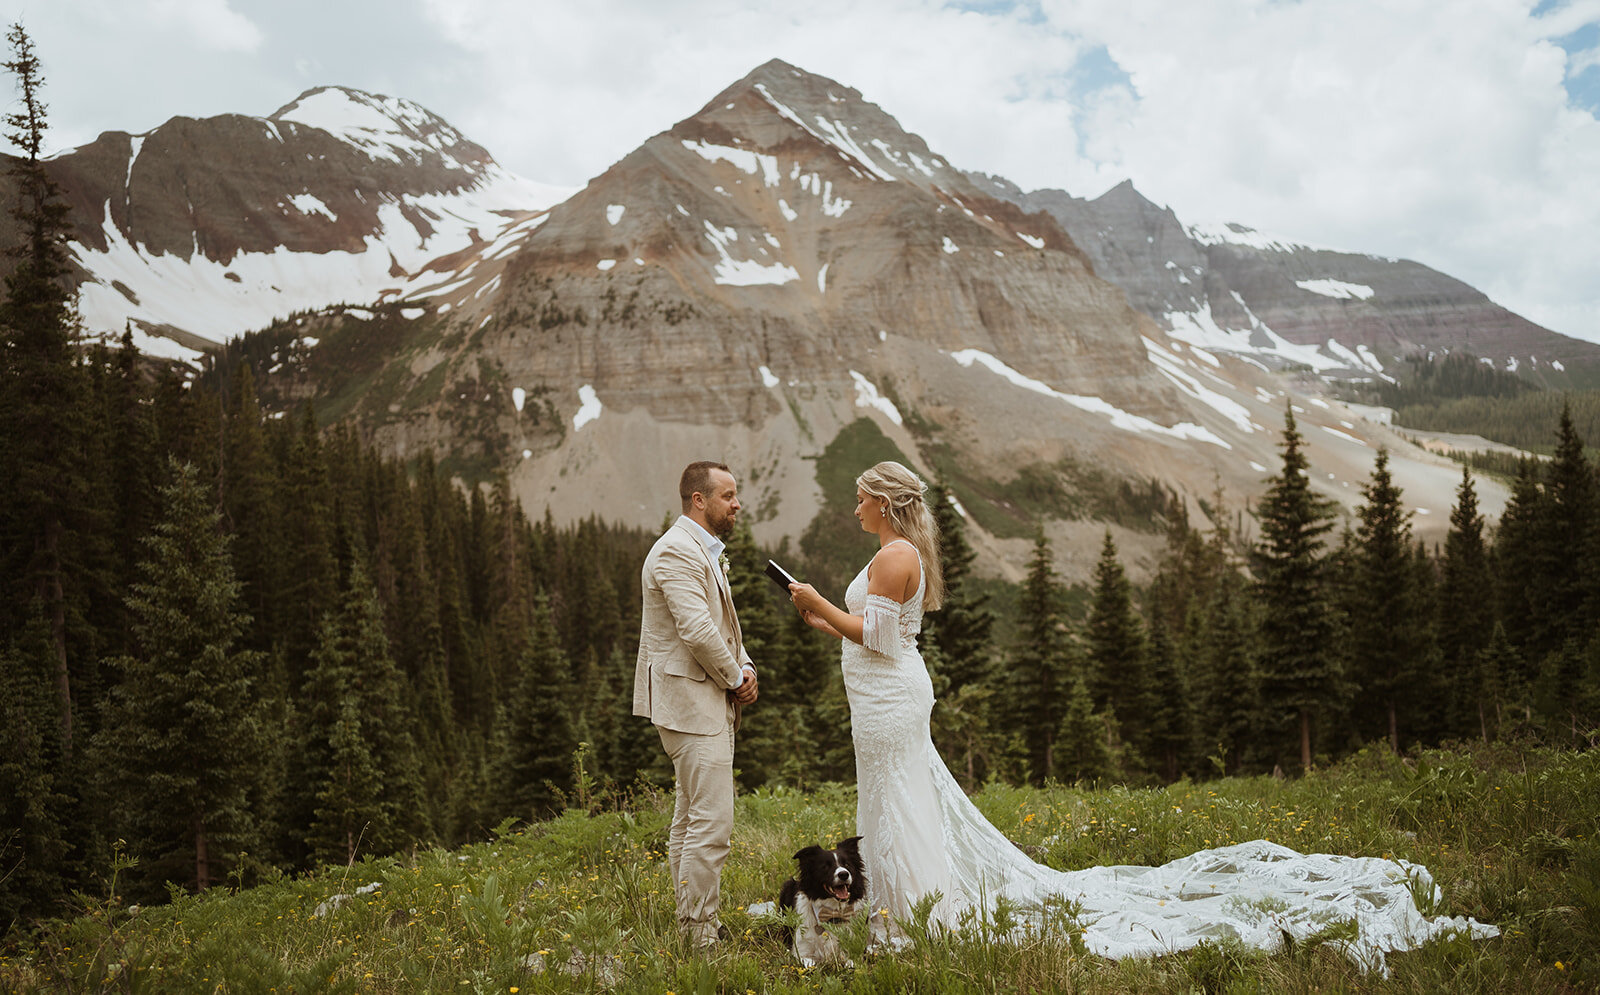 The couple is facing each other with their dog in between them as they read their vows in a valley. It is summertime and very warm. The bride is wearing a dress with patterned lace, and the groom is wearing a tan suit. They are wiping away tears as they finish their telluride elopement. The couple decided to elope in Colorado, and they hiked and off roaded on their elopement day. They included their dog in their Colorado elopement, which is a border Collie. The mountains are directly behind them and are framing them in this image. there is still snow on them, and there are wildflowers. If you want to find wildflowers on your telluride elopement, plan to elope in the early summer.